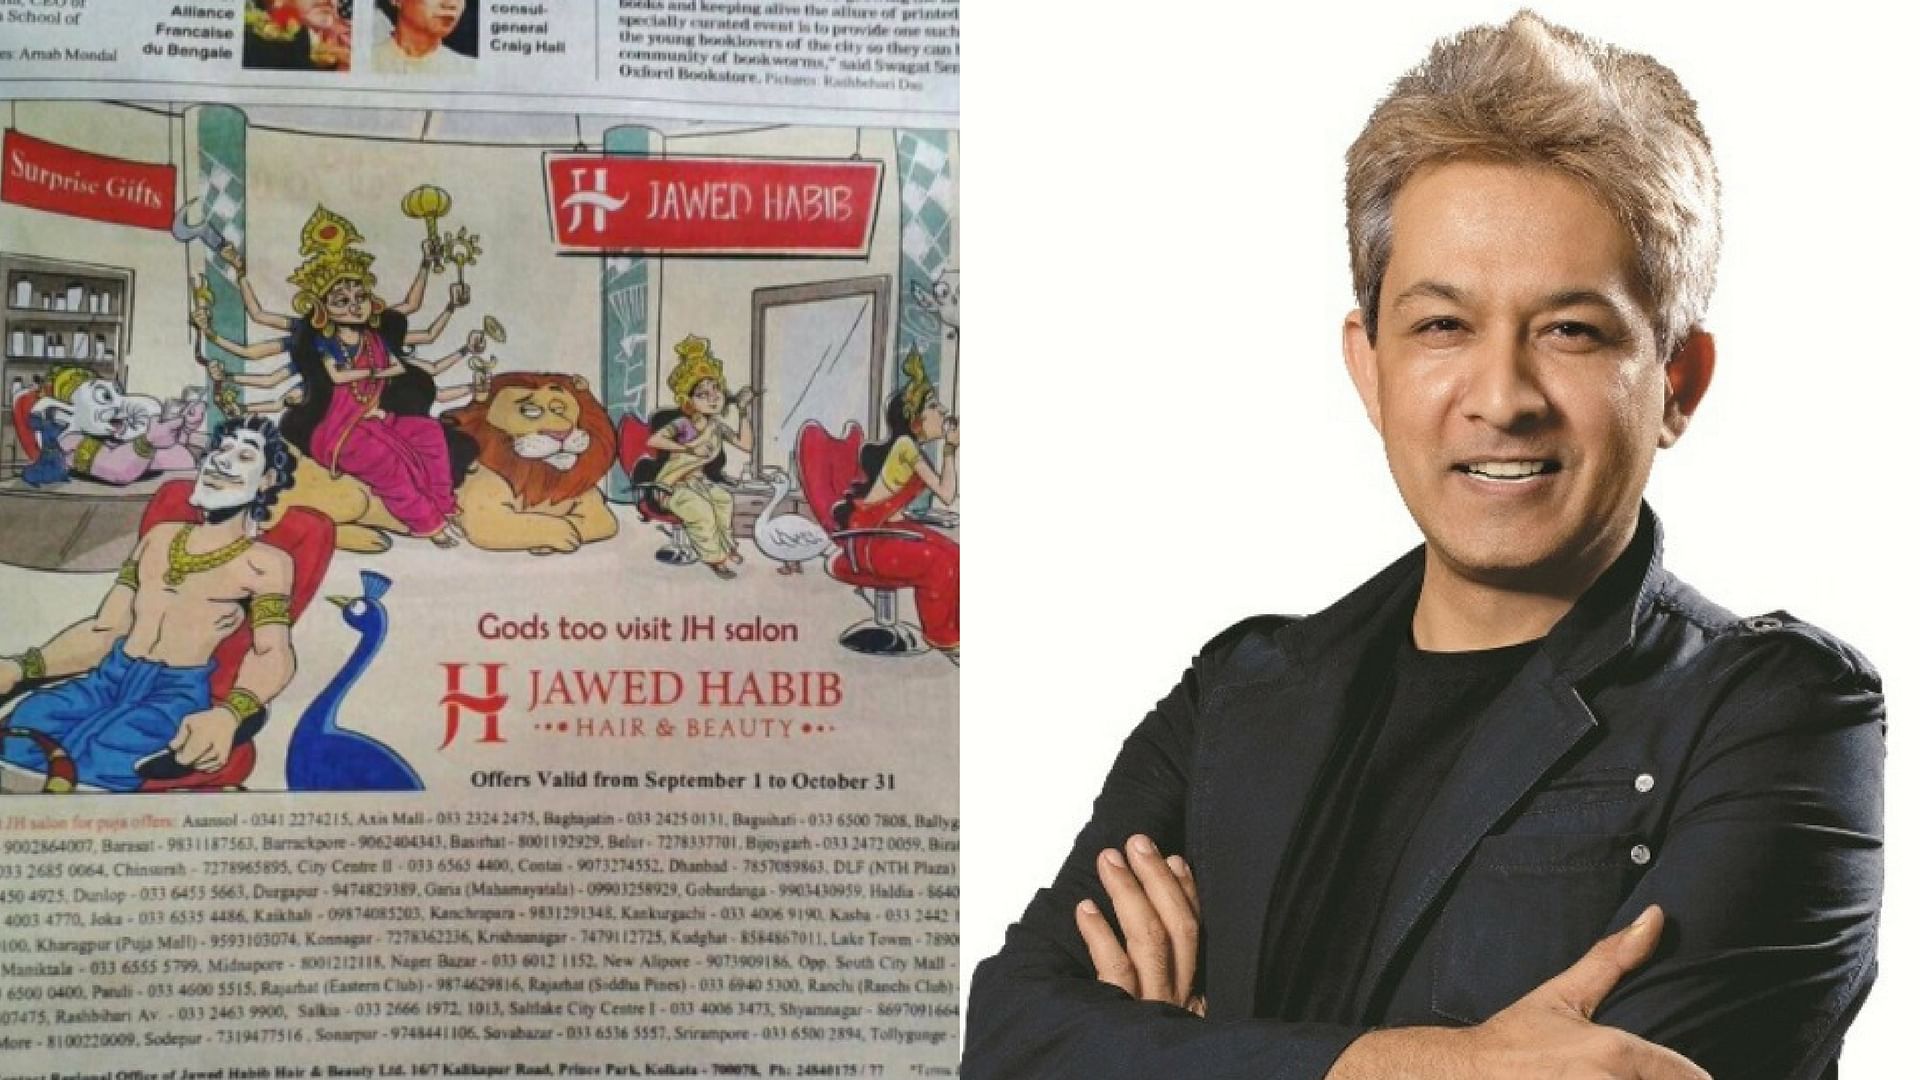 Jawed Habib may have bitten off more than he anticipated he’d have to chew.